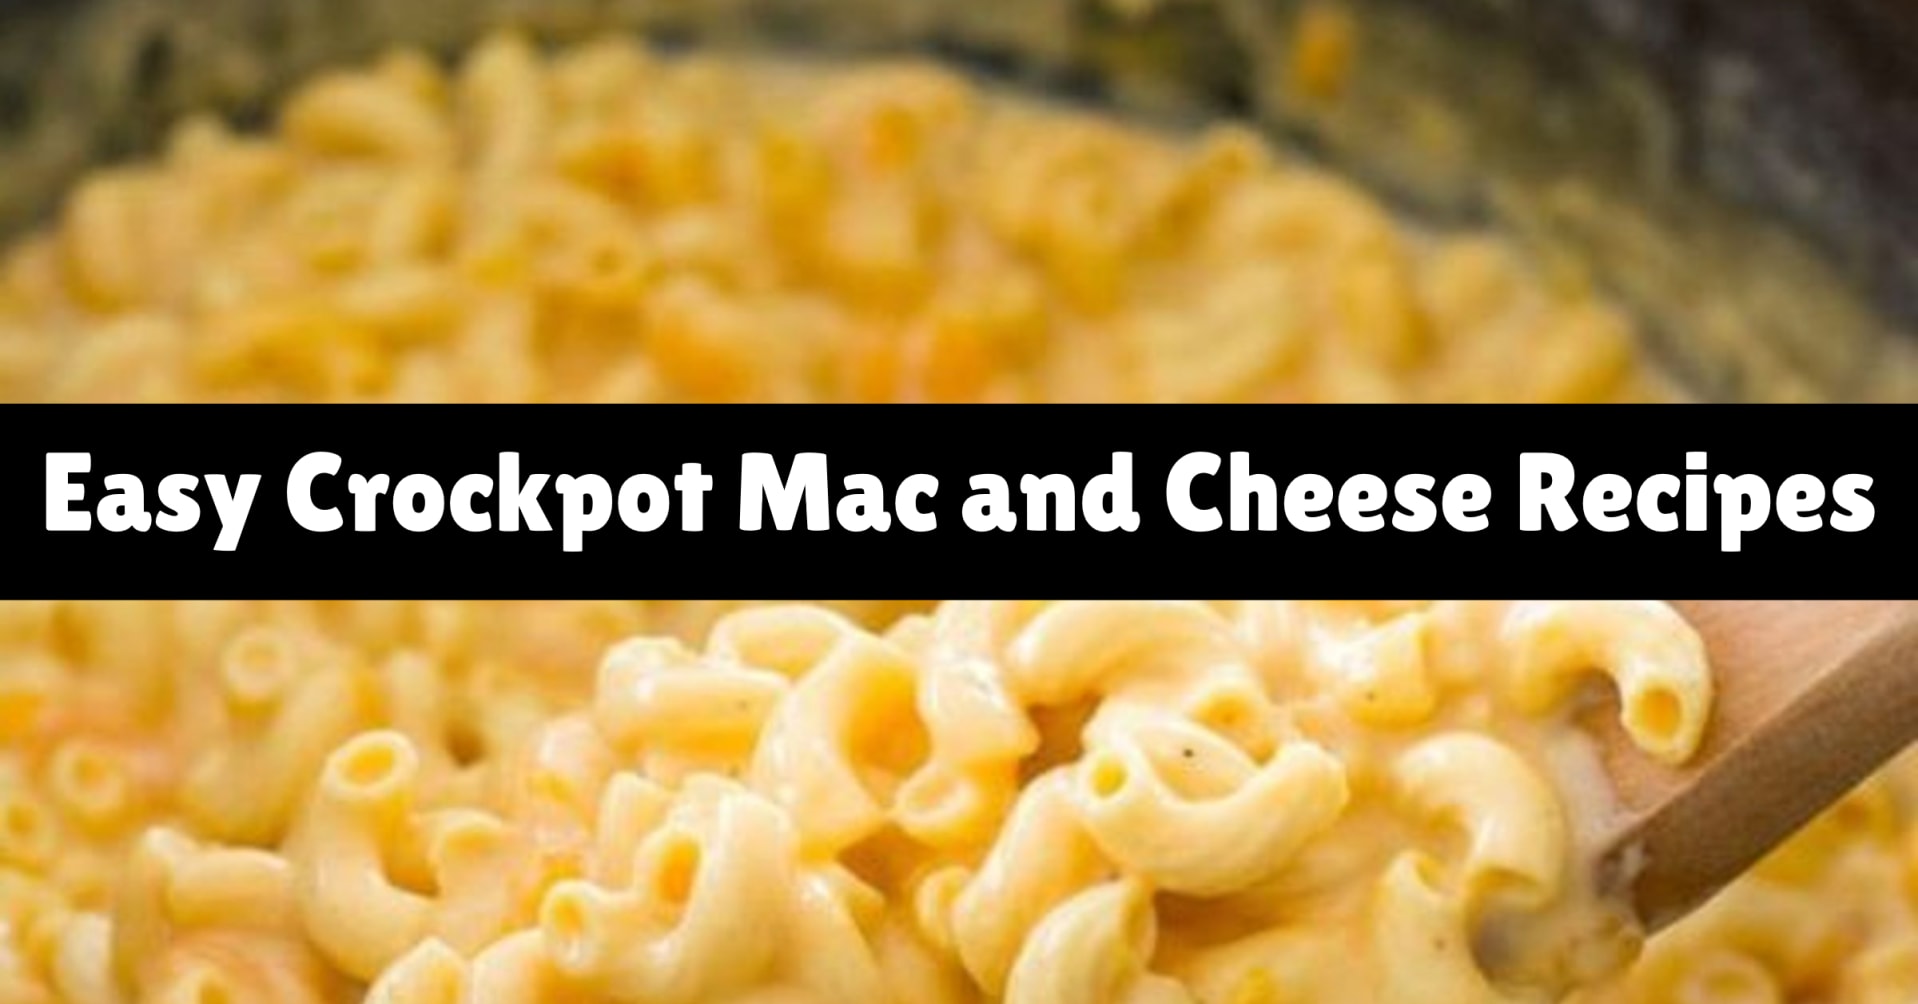 Crock pot mac and cheese with velveeta, like paula deen, creamy crockpot mac and cheese and more easy slow cooker macaroni and cheese recipes with and without evaporated milk - southern crock pot mac and cheese recipes too!